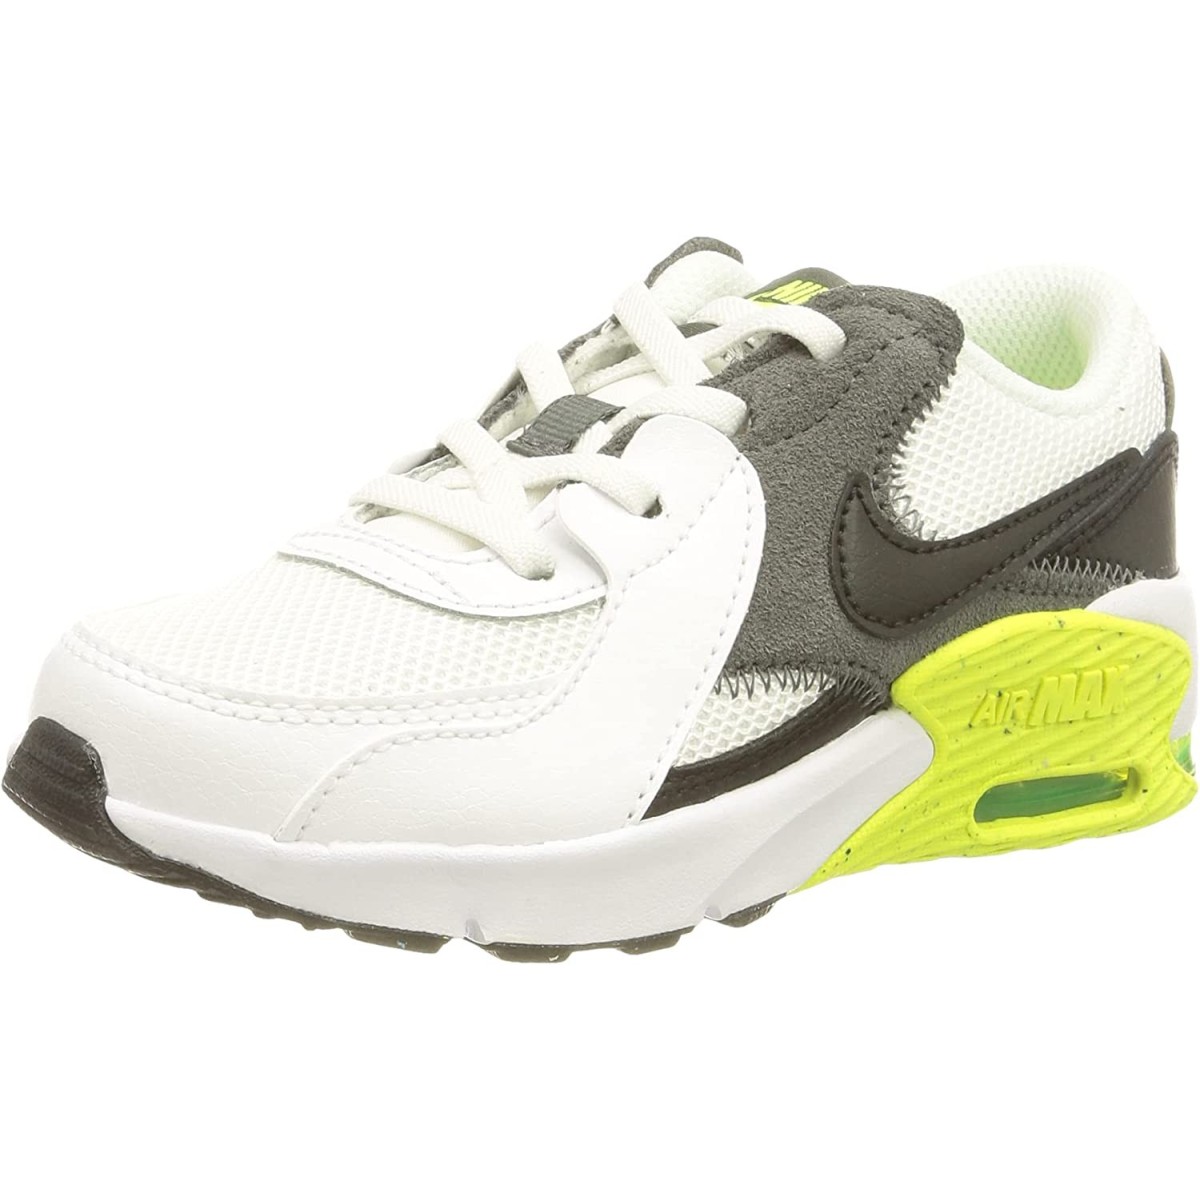 Shoes NIKE AIR MAX EXCEE grey-volt white/black-iron CD6892 110 (PS)